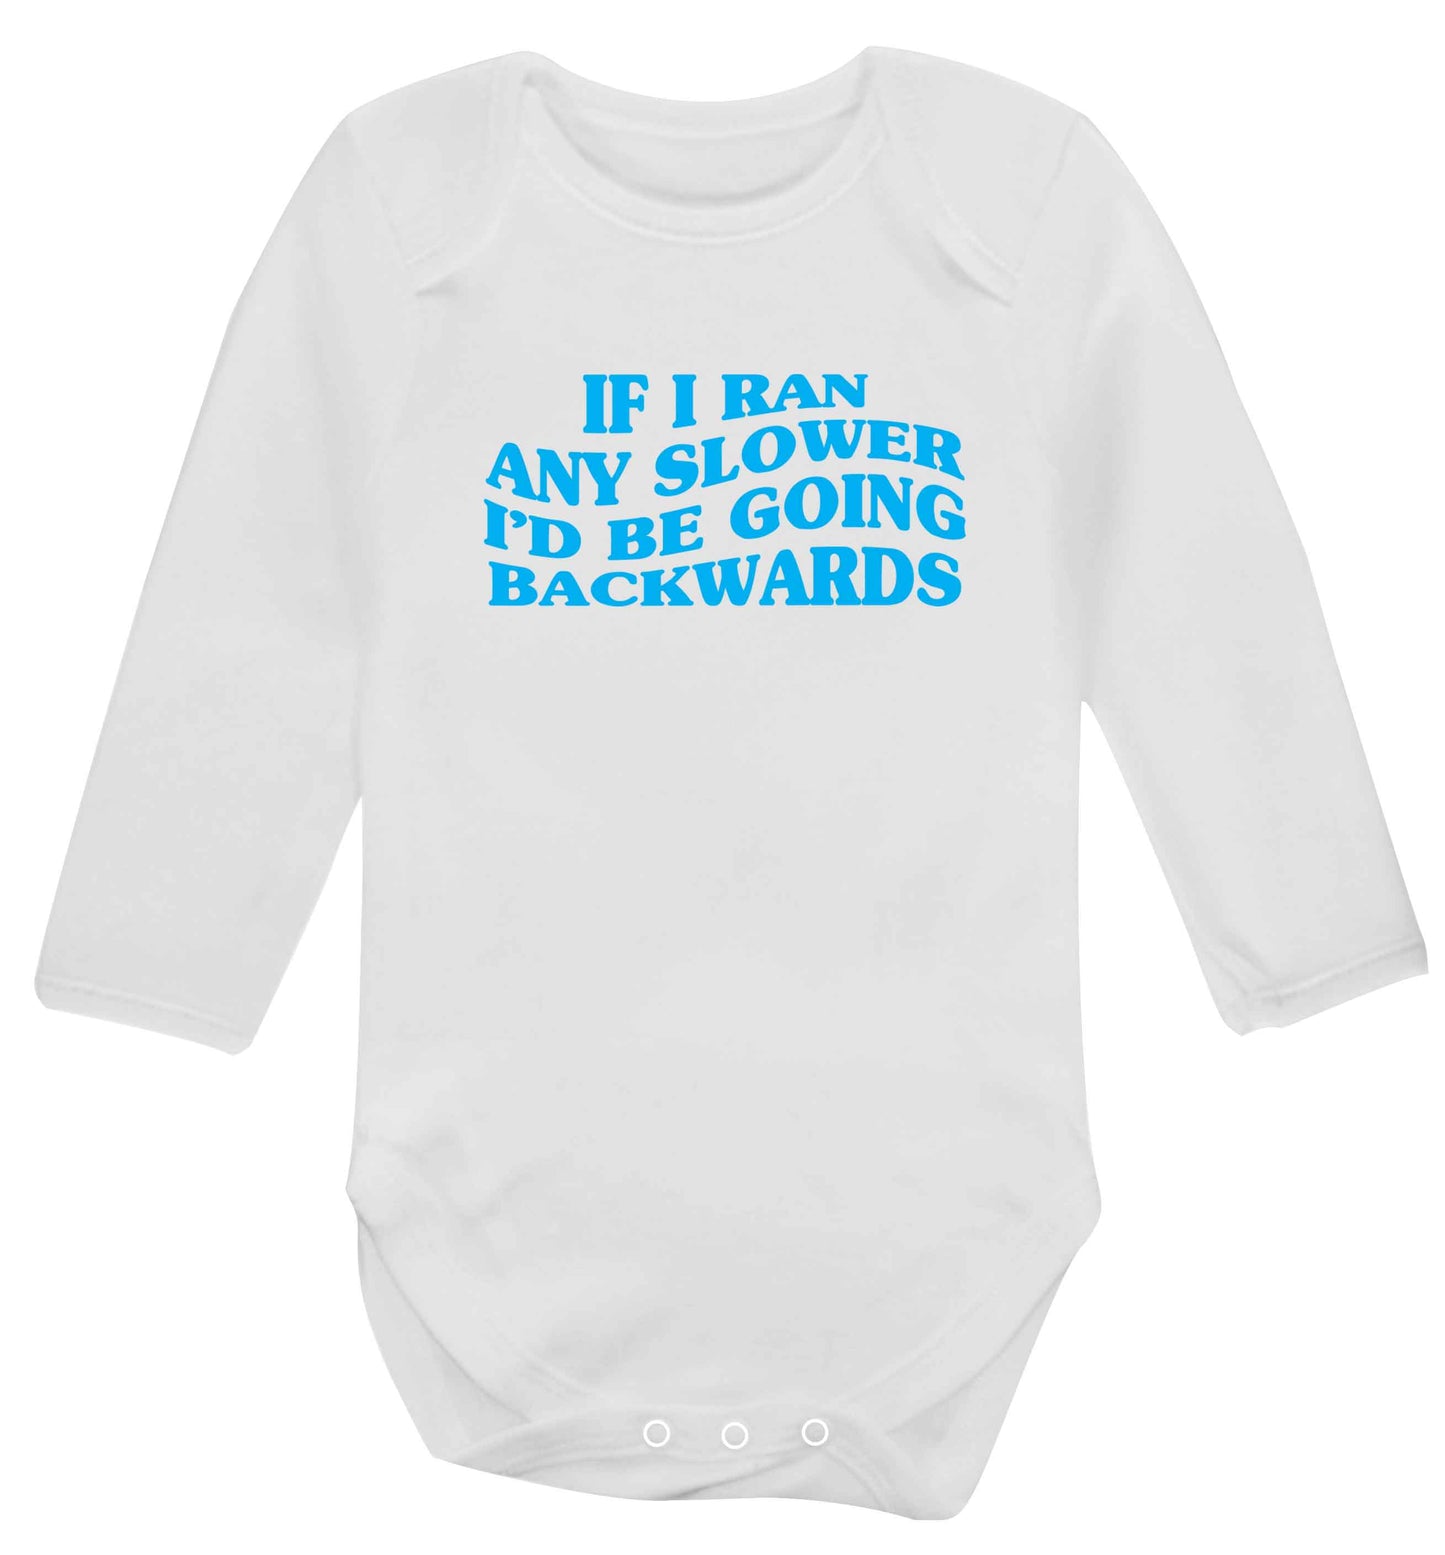 If I ran any slower I'd be going backwards baby vest long sleeved white 6-12 months